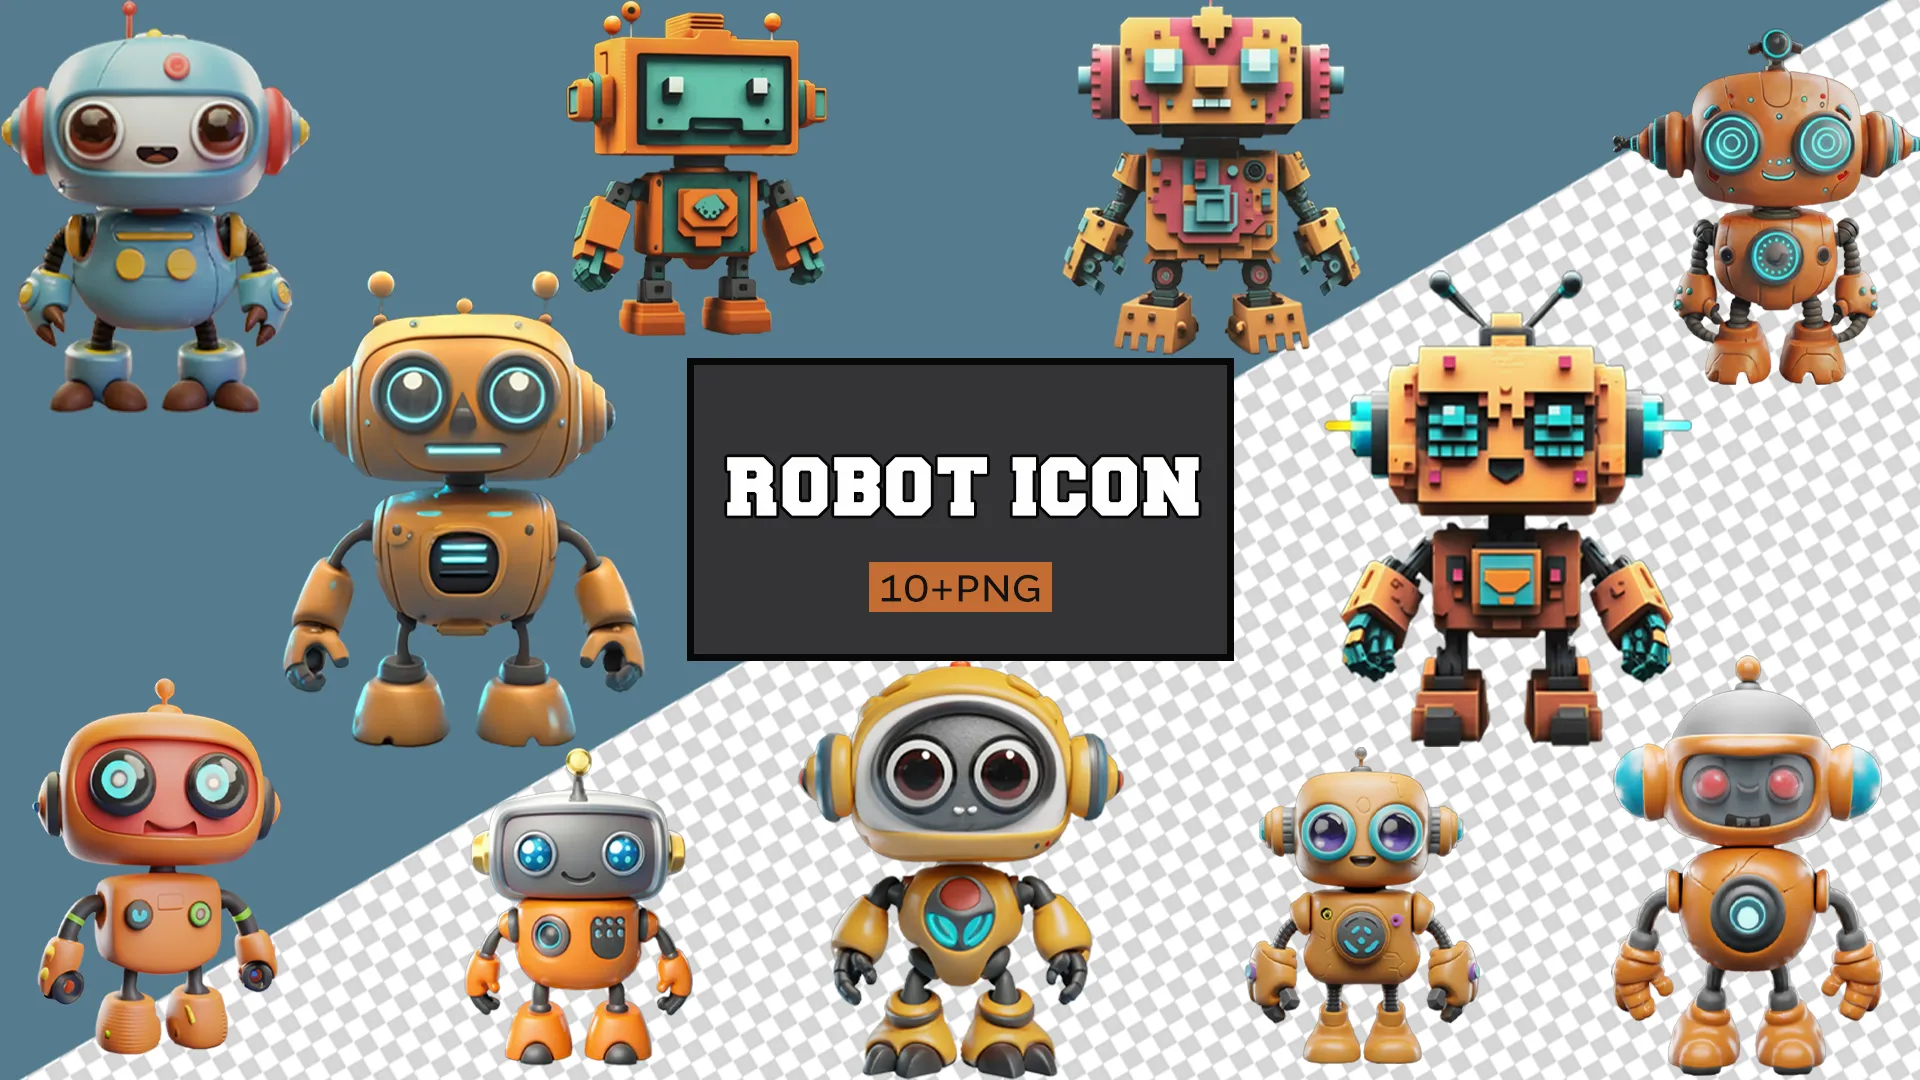 Futuristic Robot Friends 3D Pack for Tech Projects image